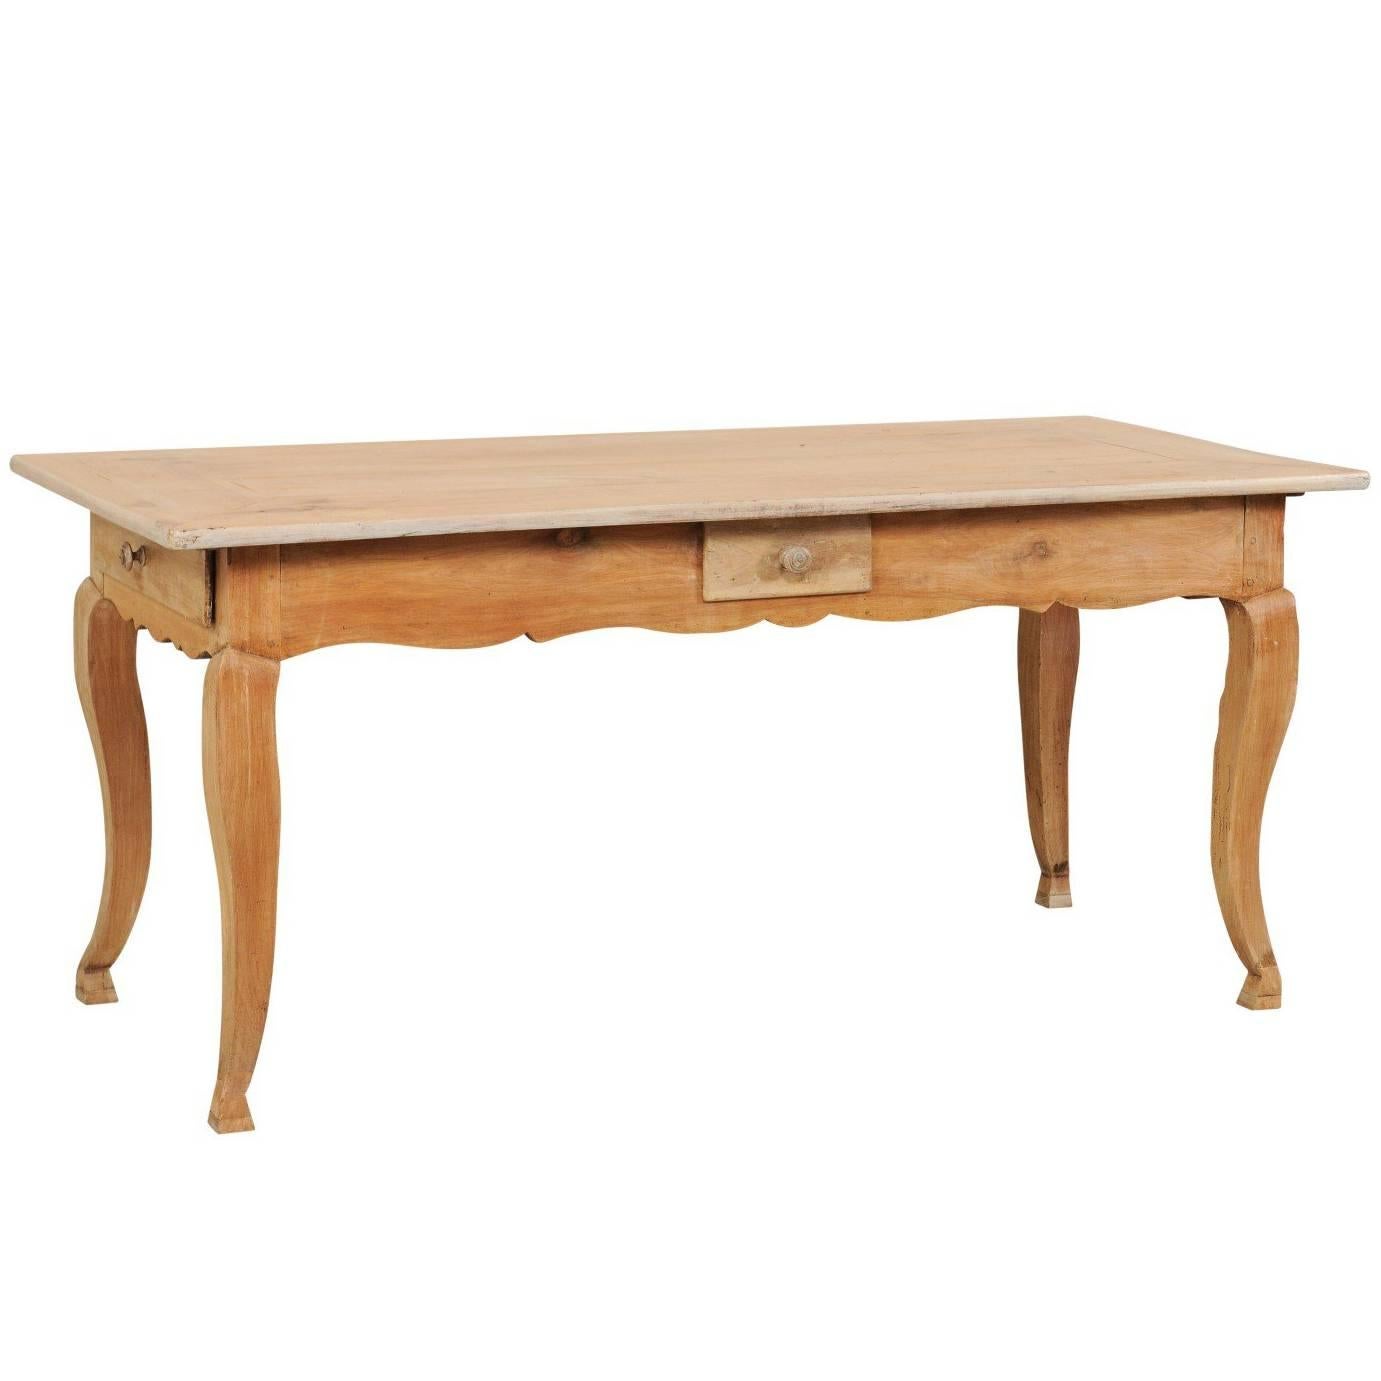 French 19th Century Louis XV Style Provincial Desk Table with Cabriole Legs